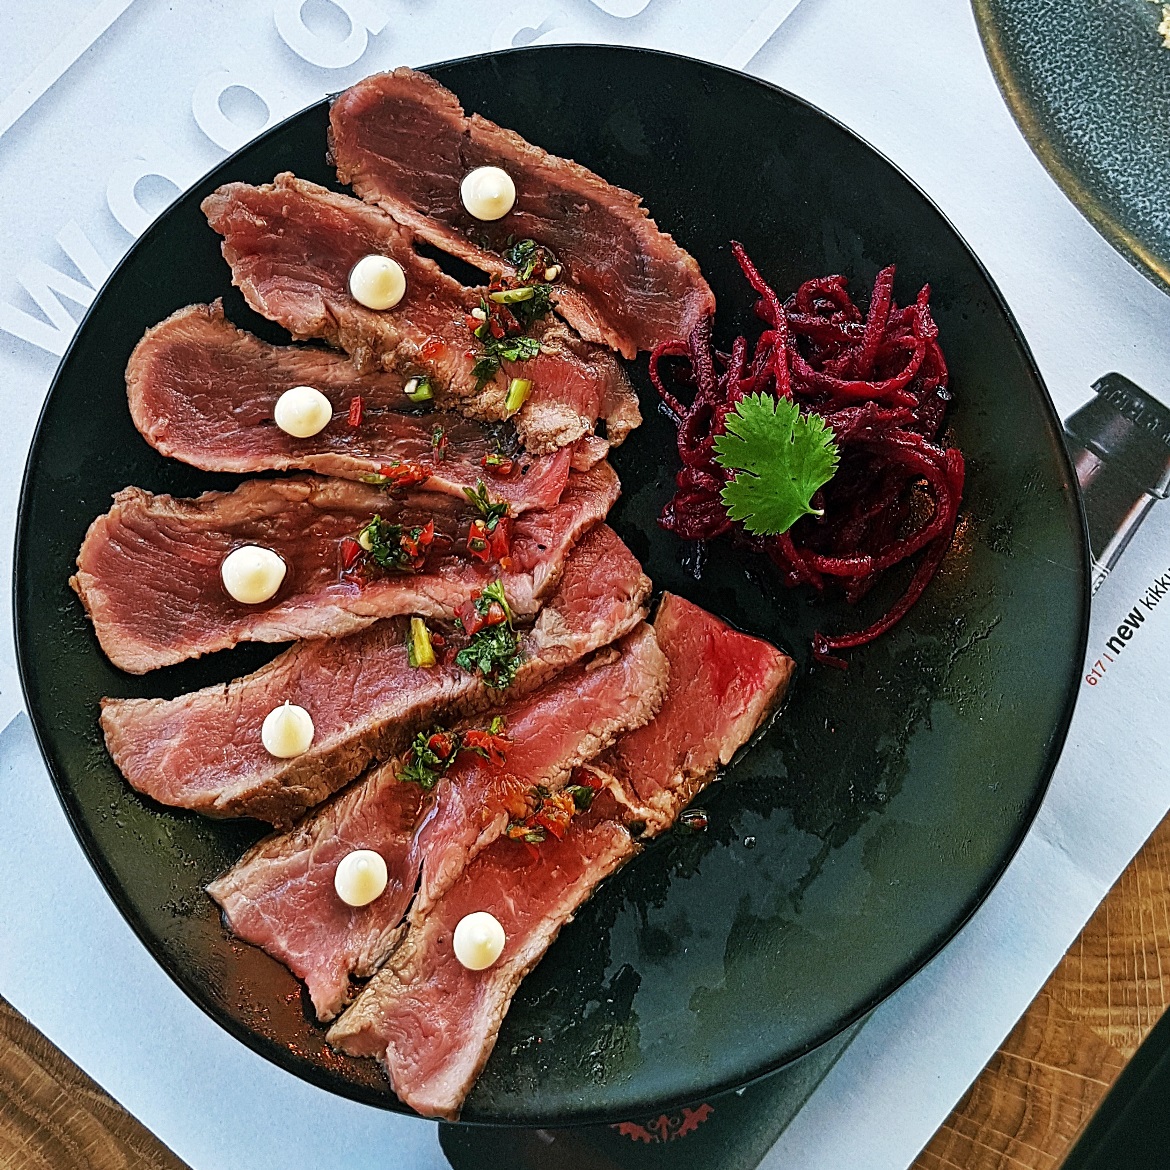 Beef tataki - Wagamama Menu Pairing, Review by BeckyBecky Blogs